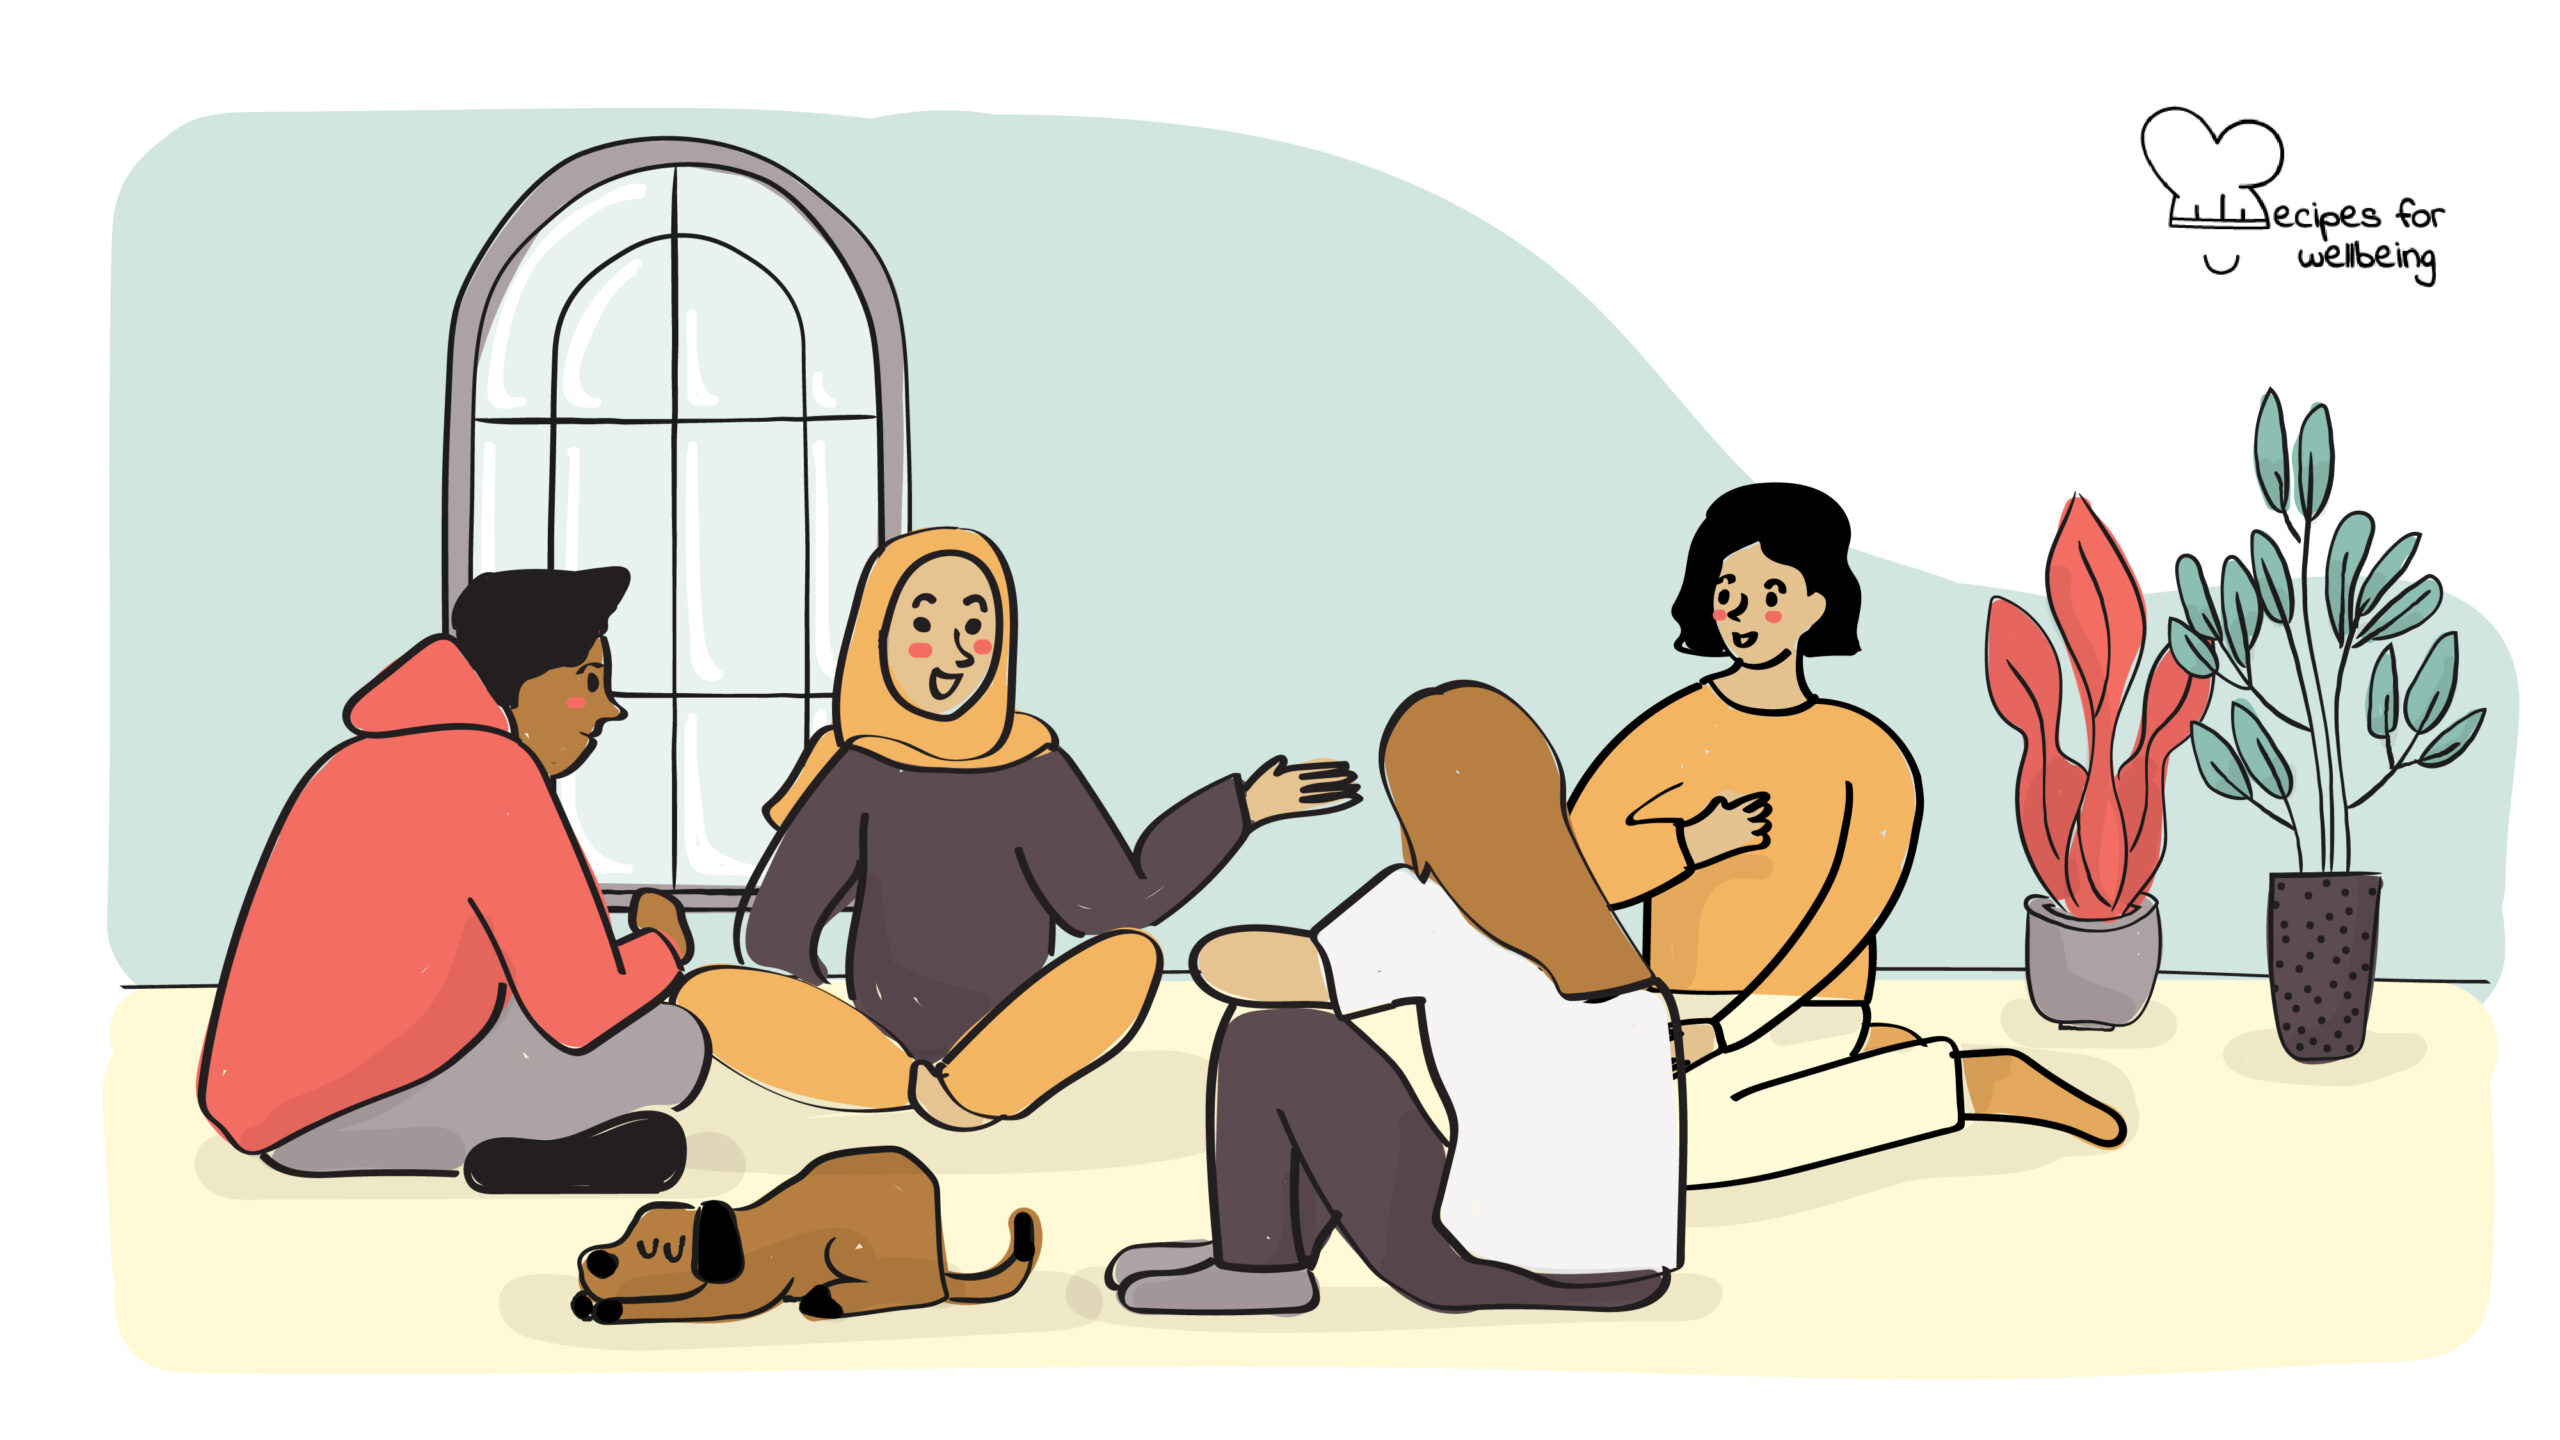 Illustration of a group of 4 people (and a dog) sitting in a circle on the floor. © Recipes for Wellbeing